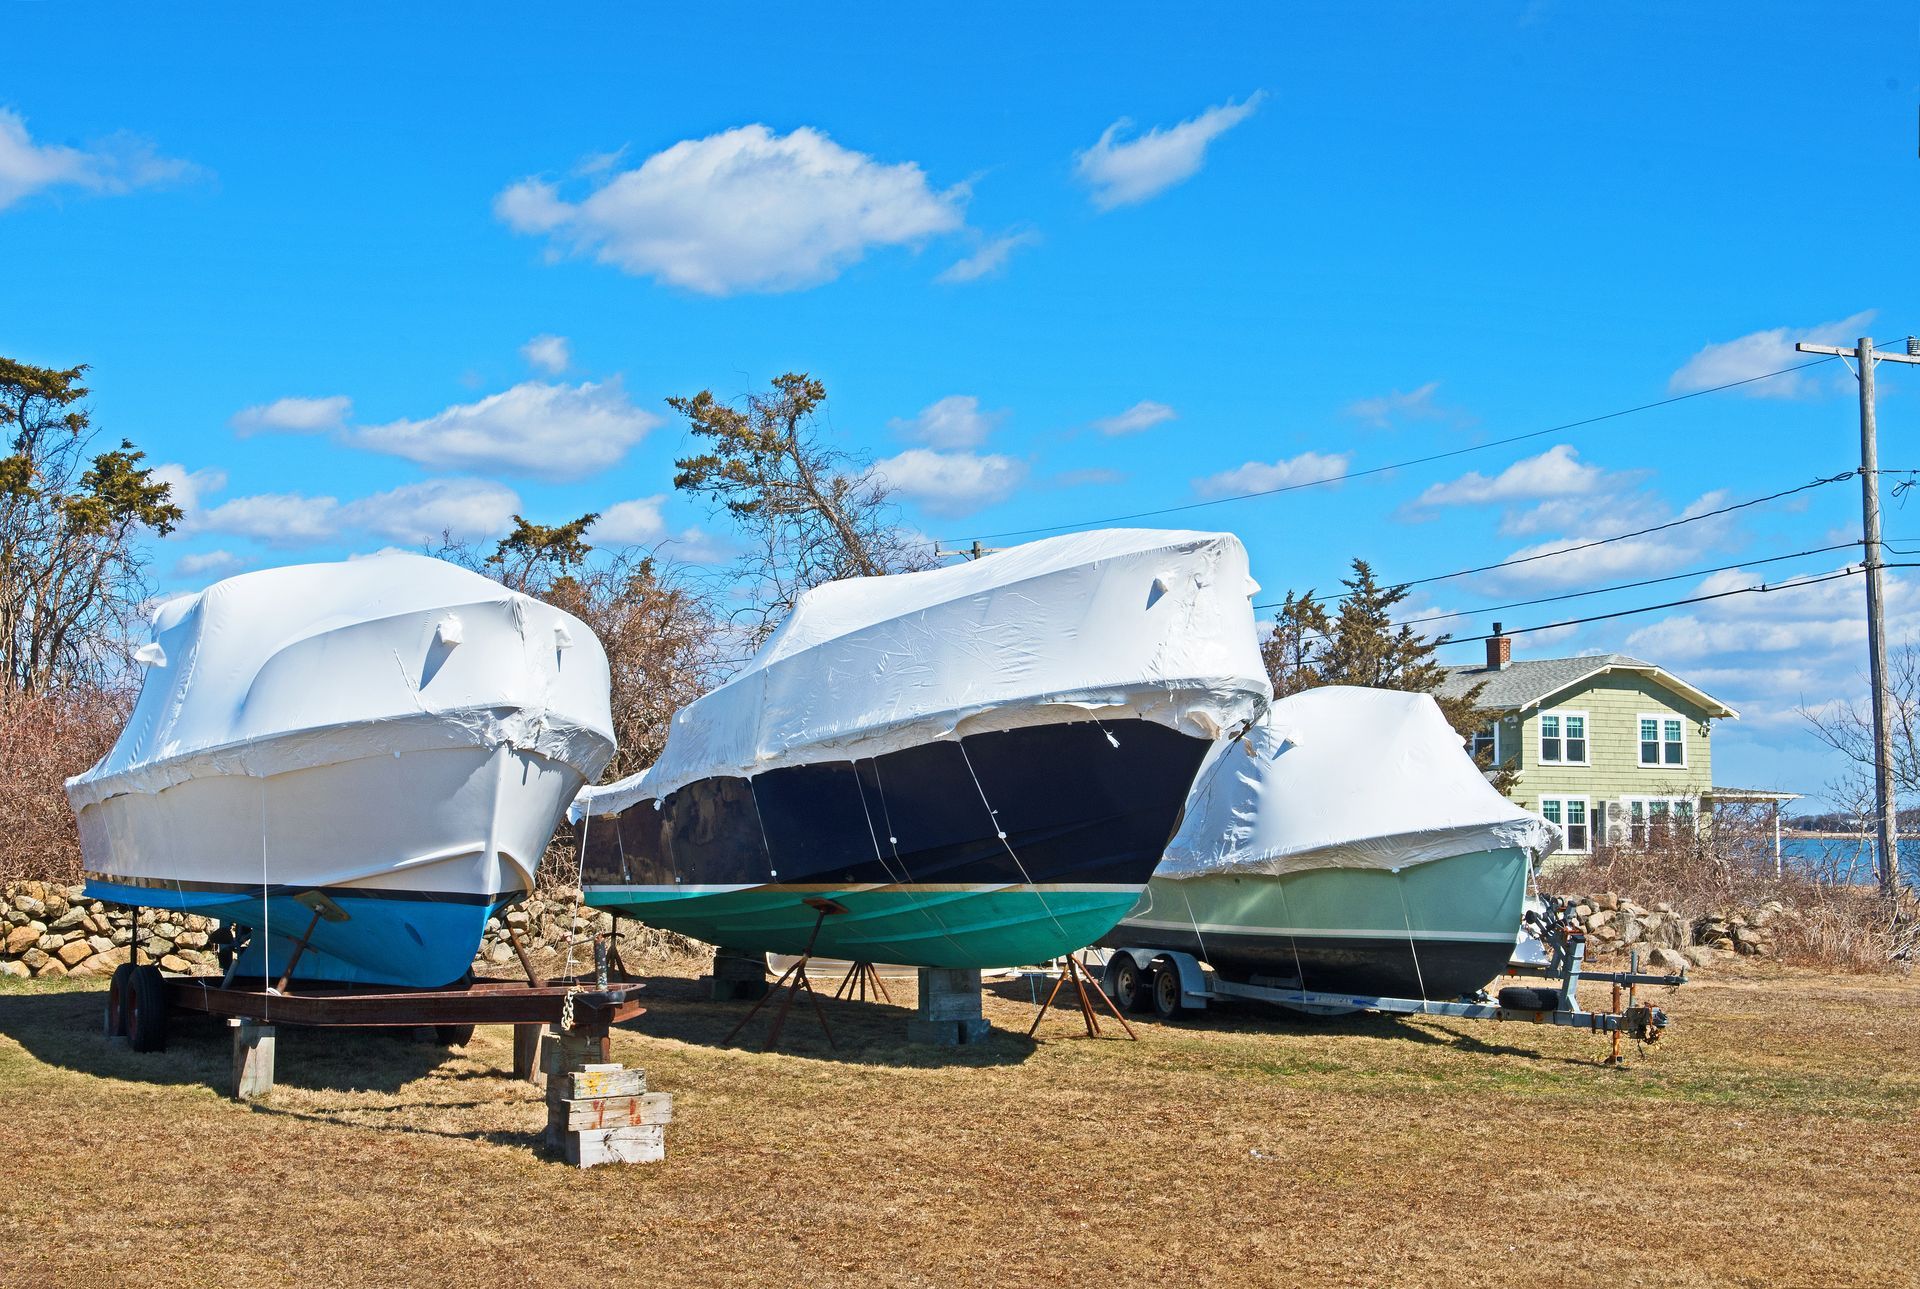 Three small boats on grass covered with white top canvas boat covers